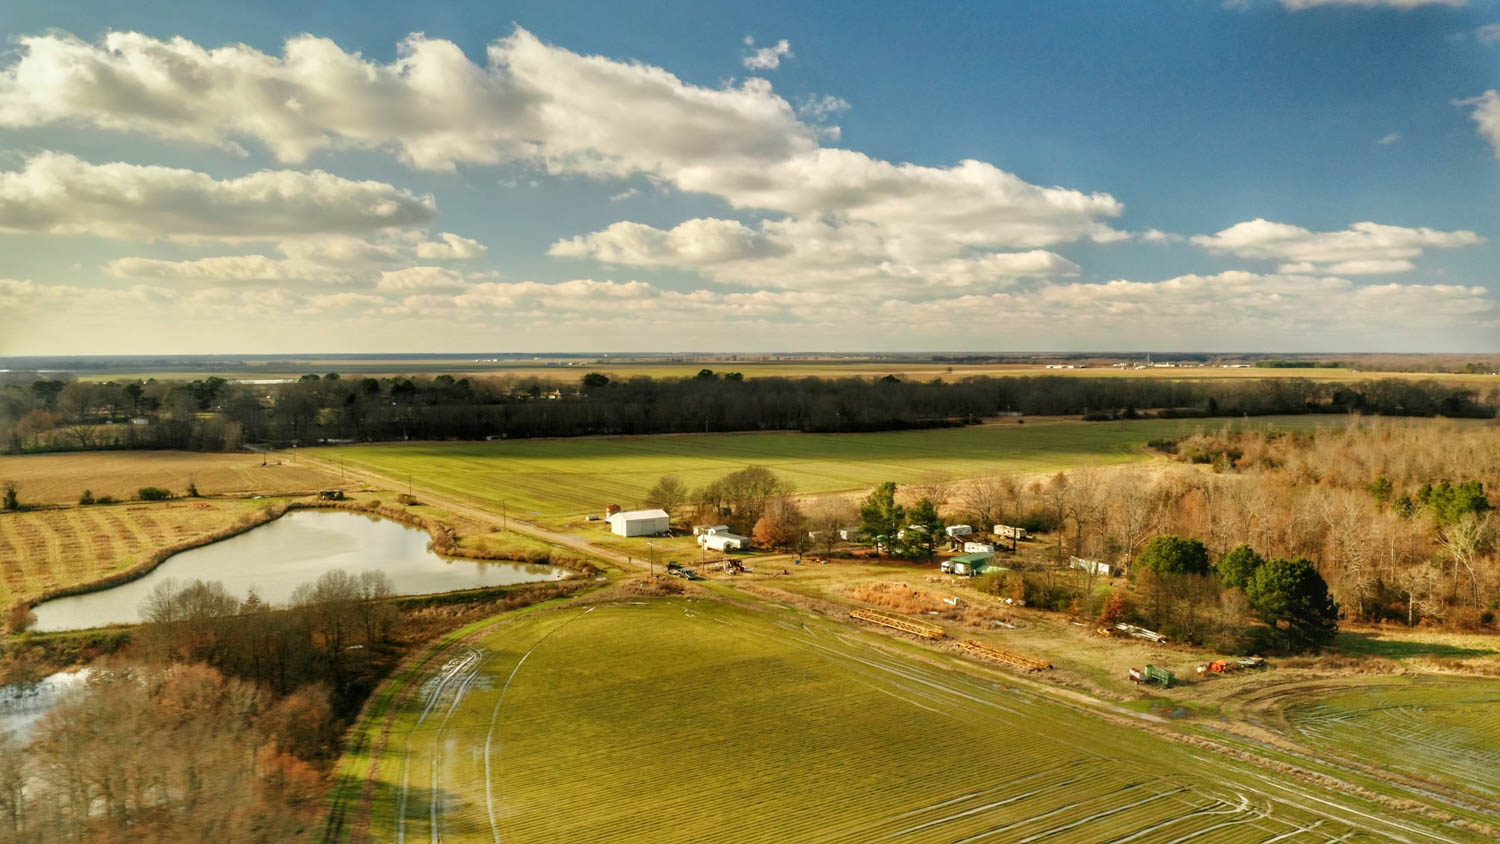 Wellons Land Active Listings The Lawson-Trotter Farm 7